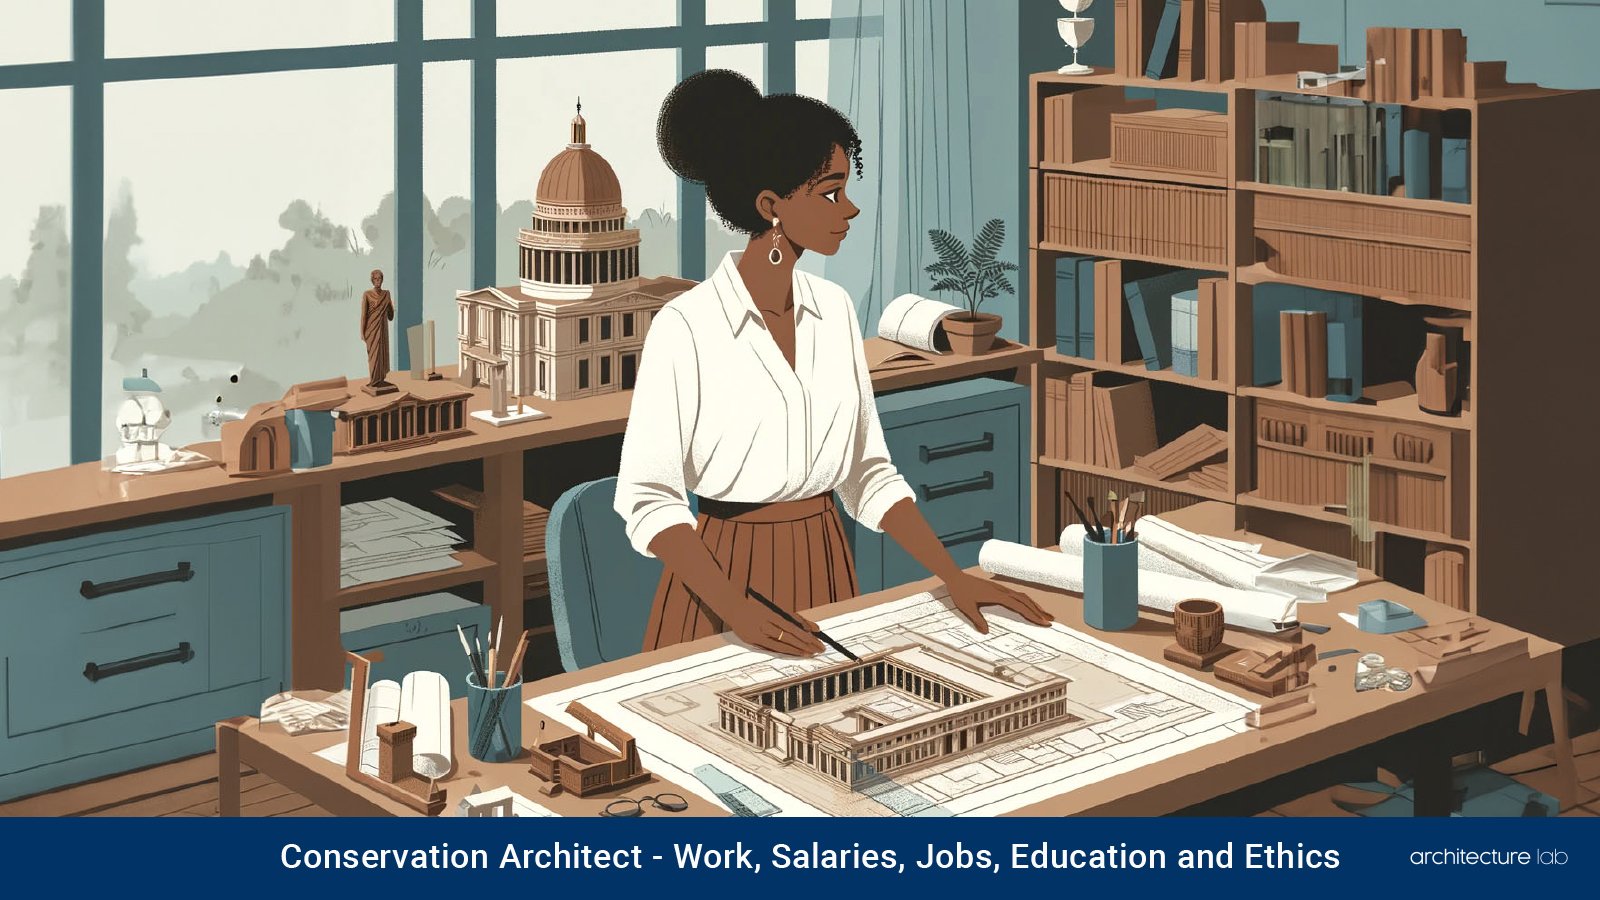 Conservation architect: work, salaries, jobs, education and ethics